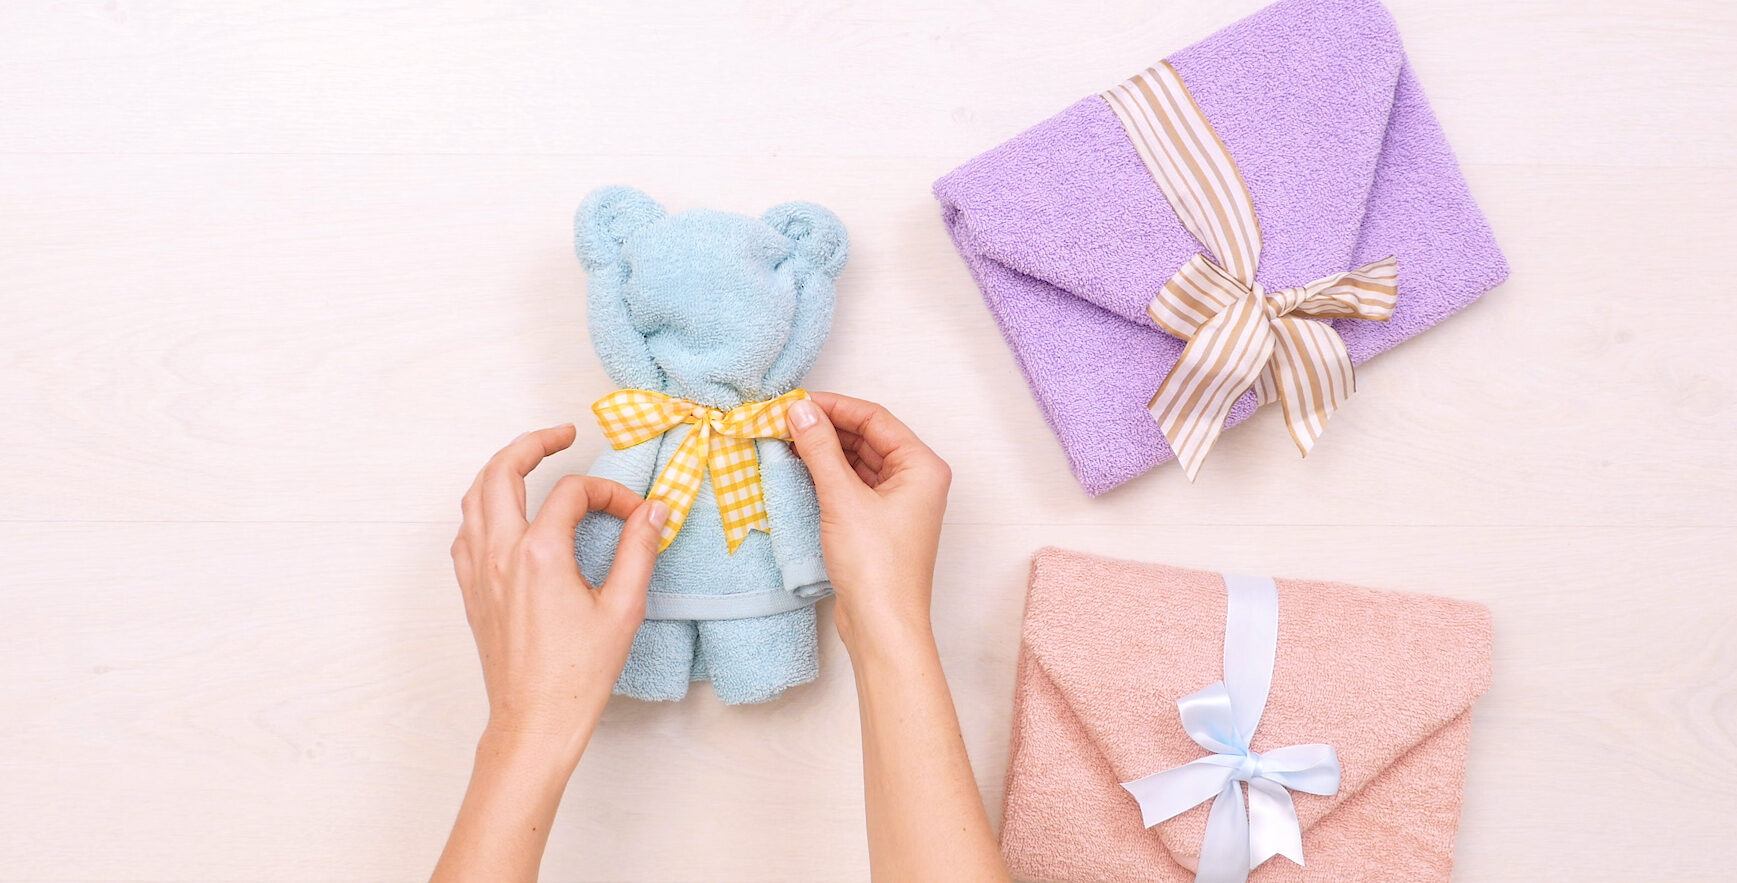 How to Fold Towels for a Gift